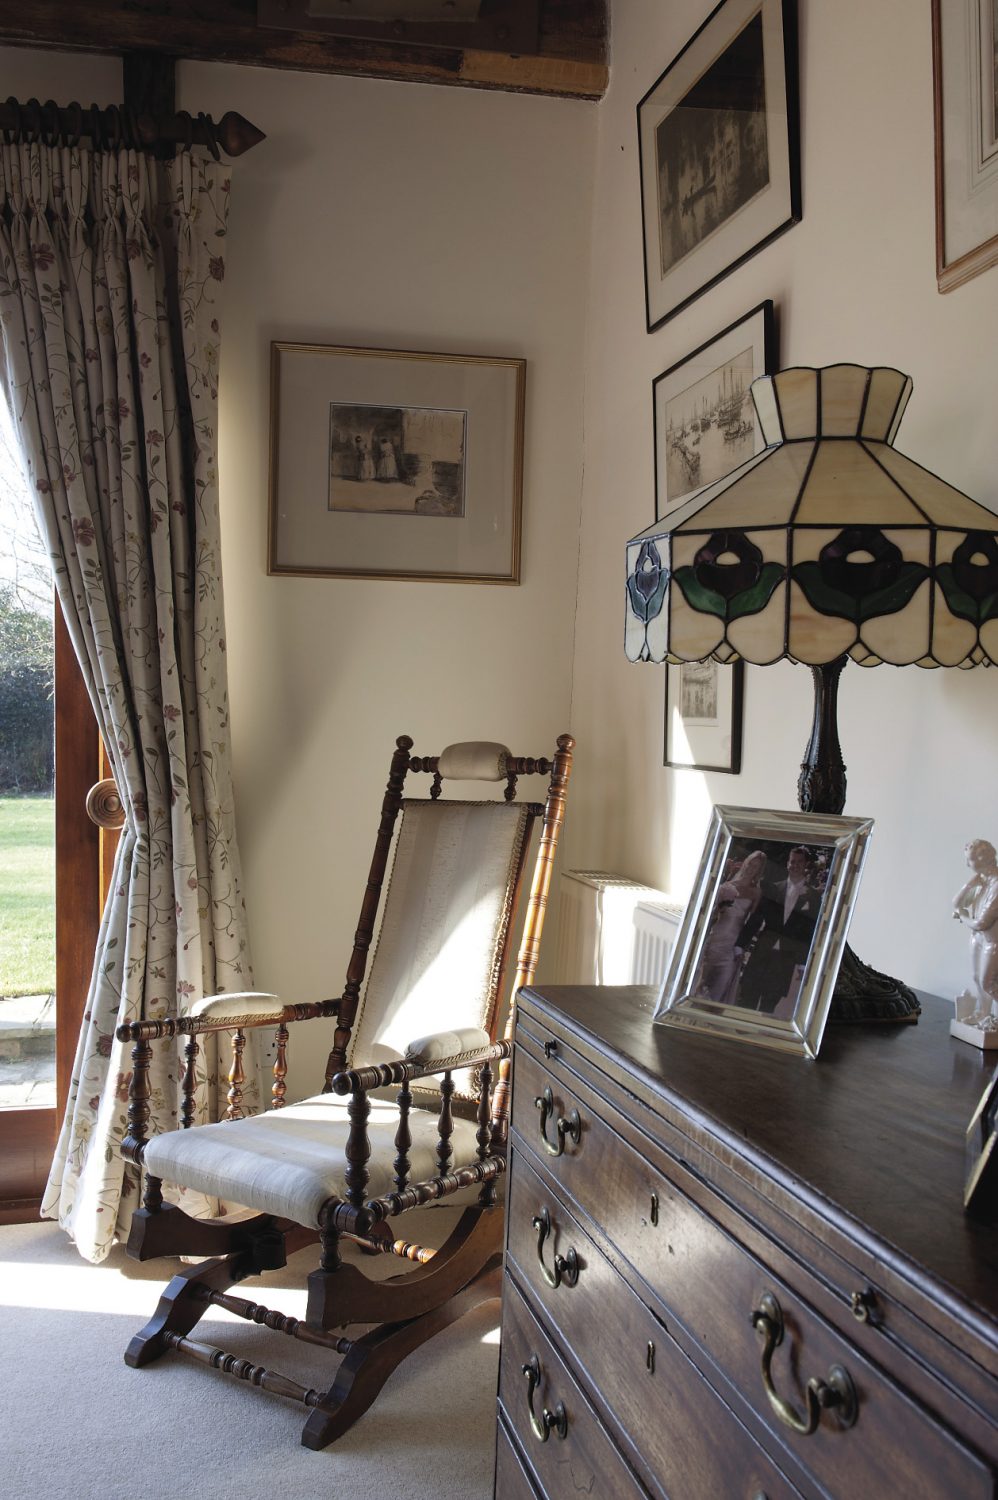 The cosy drawing room is the heart of the home where the whole family gather together to sit in front of the fire with a bottle of wine. “We’re fortunate because the children come back here often and I think the house has quite a lot to do with that,” says Daphne